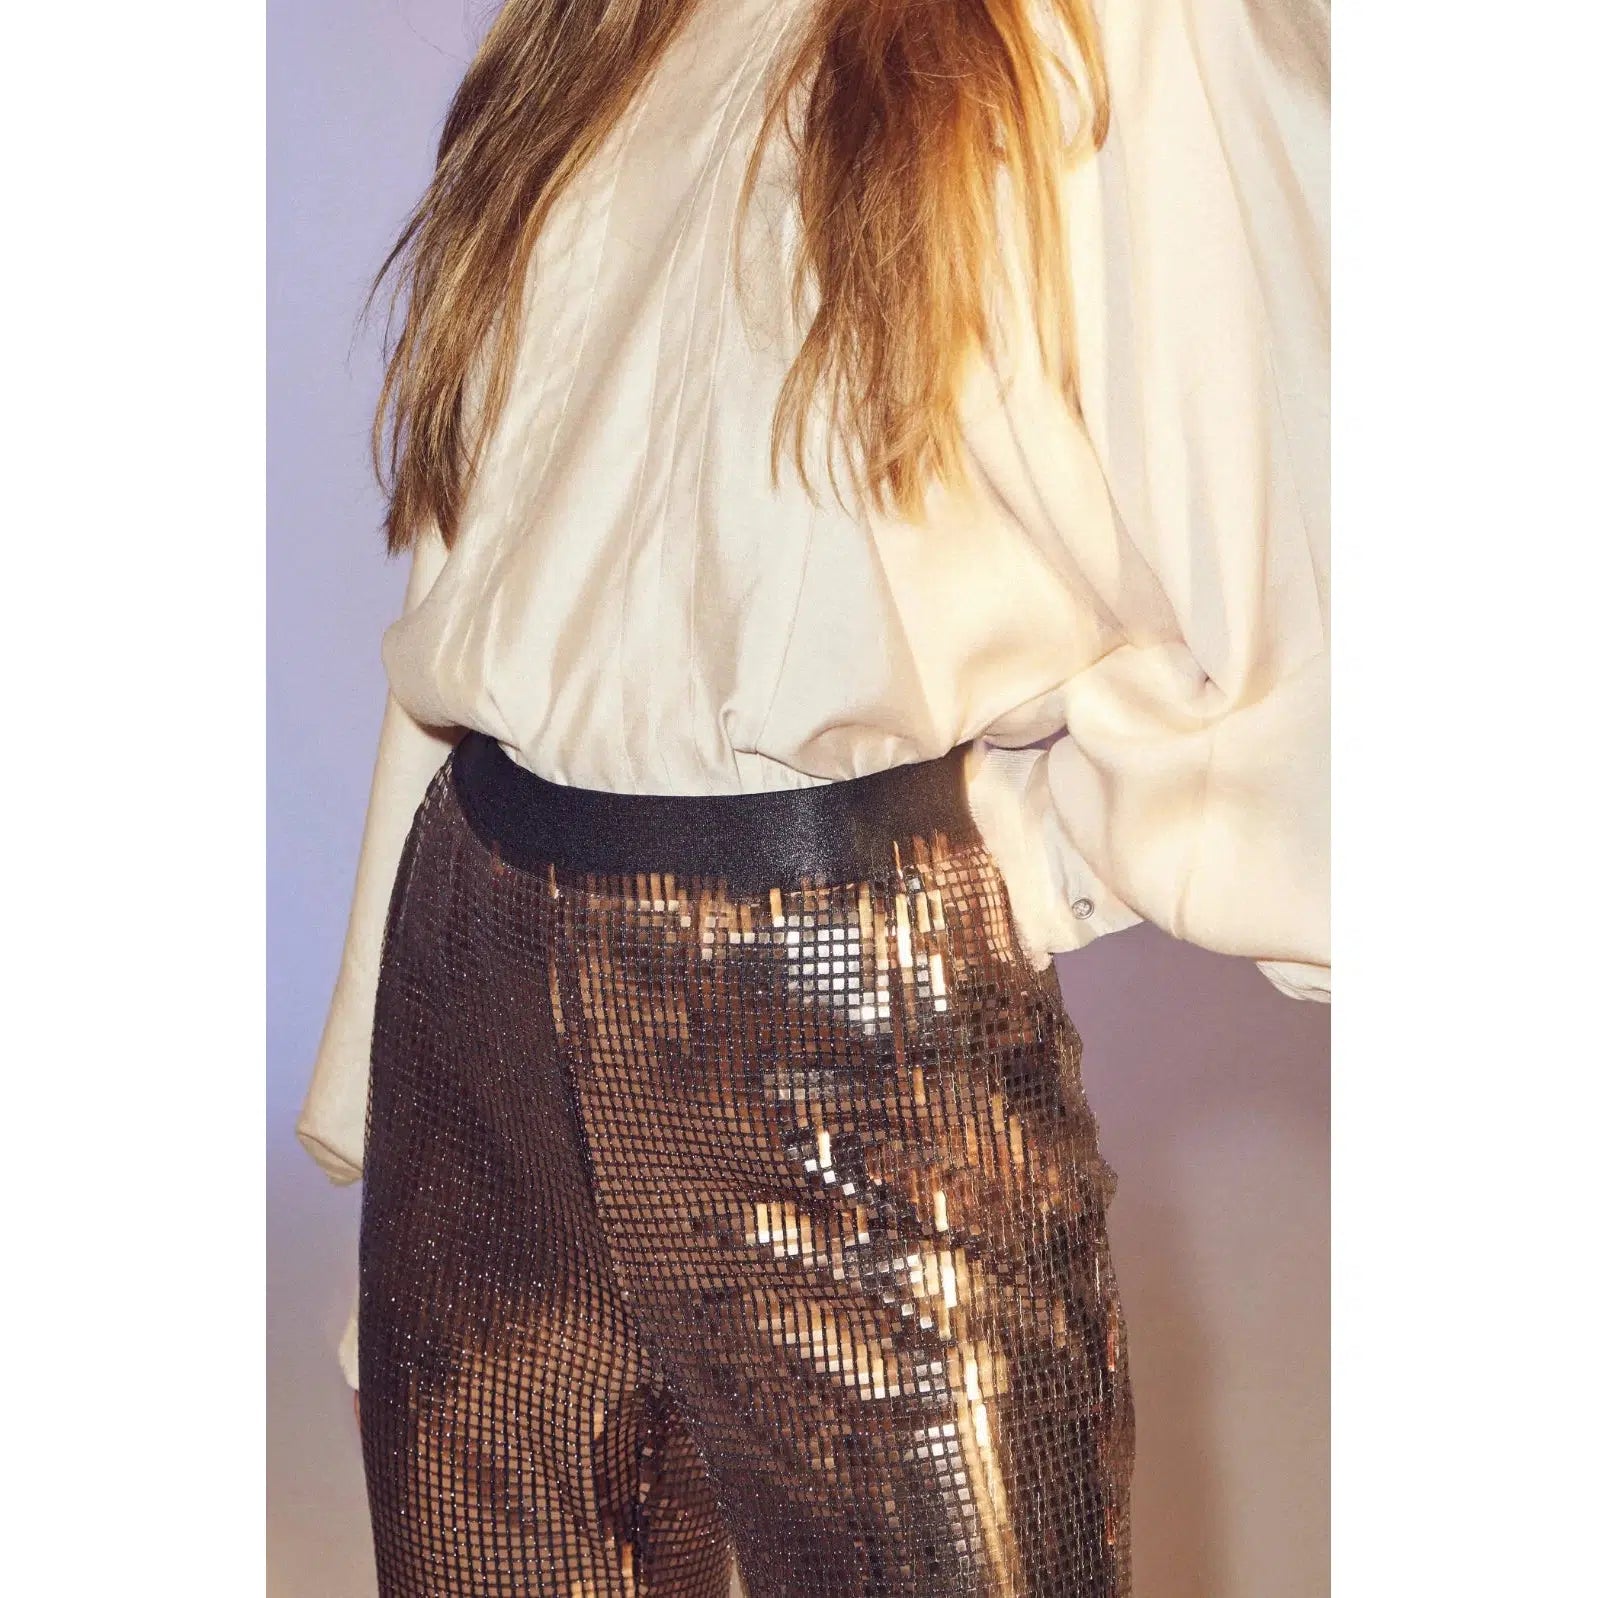 Mirror Flare Pant, Bronze, Bukser fra Co'Couture-wüpp